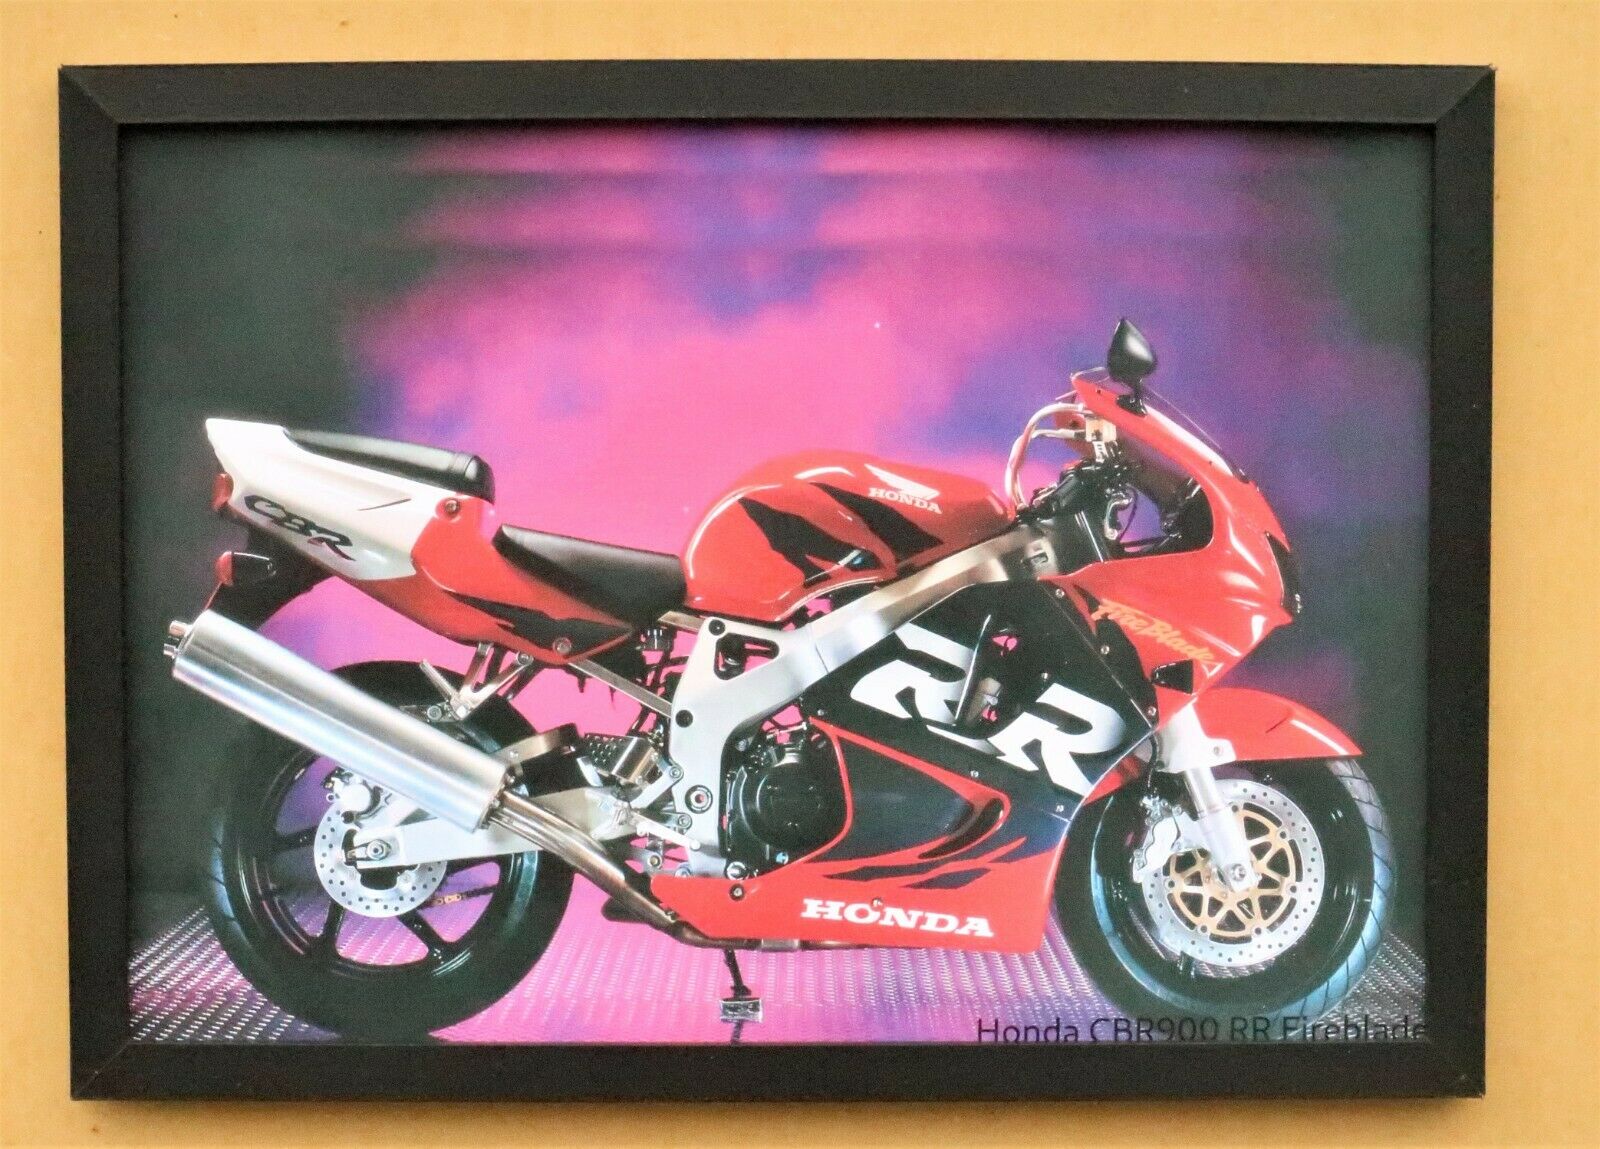 Honda CBR900 RR Fireblade Motorcycle A3/A4 Size Print Poster on Photographic Paper